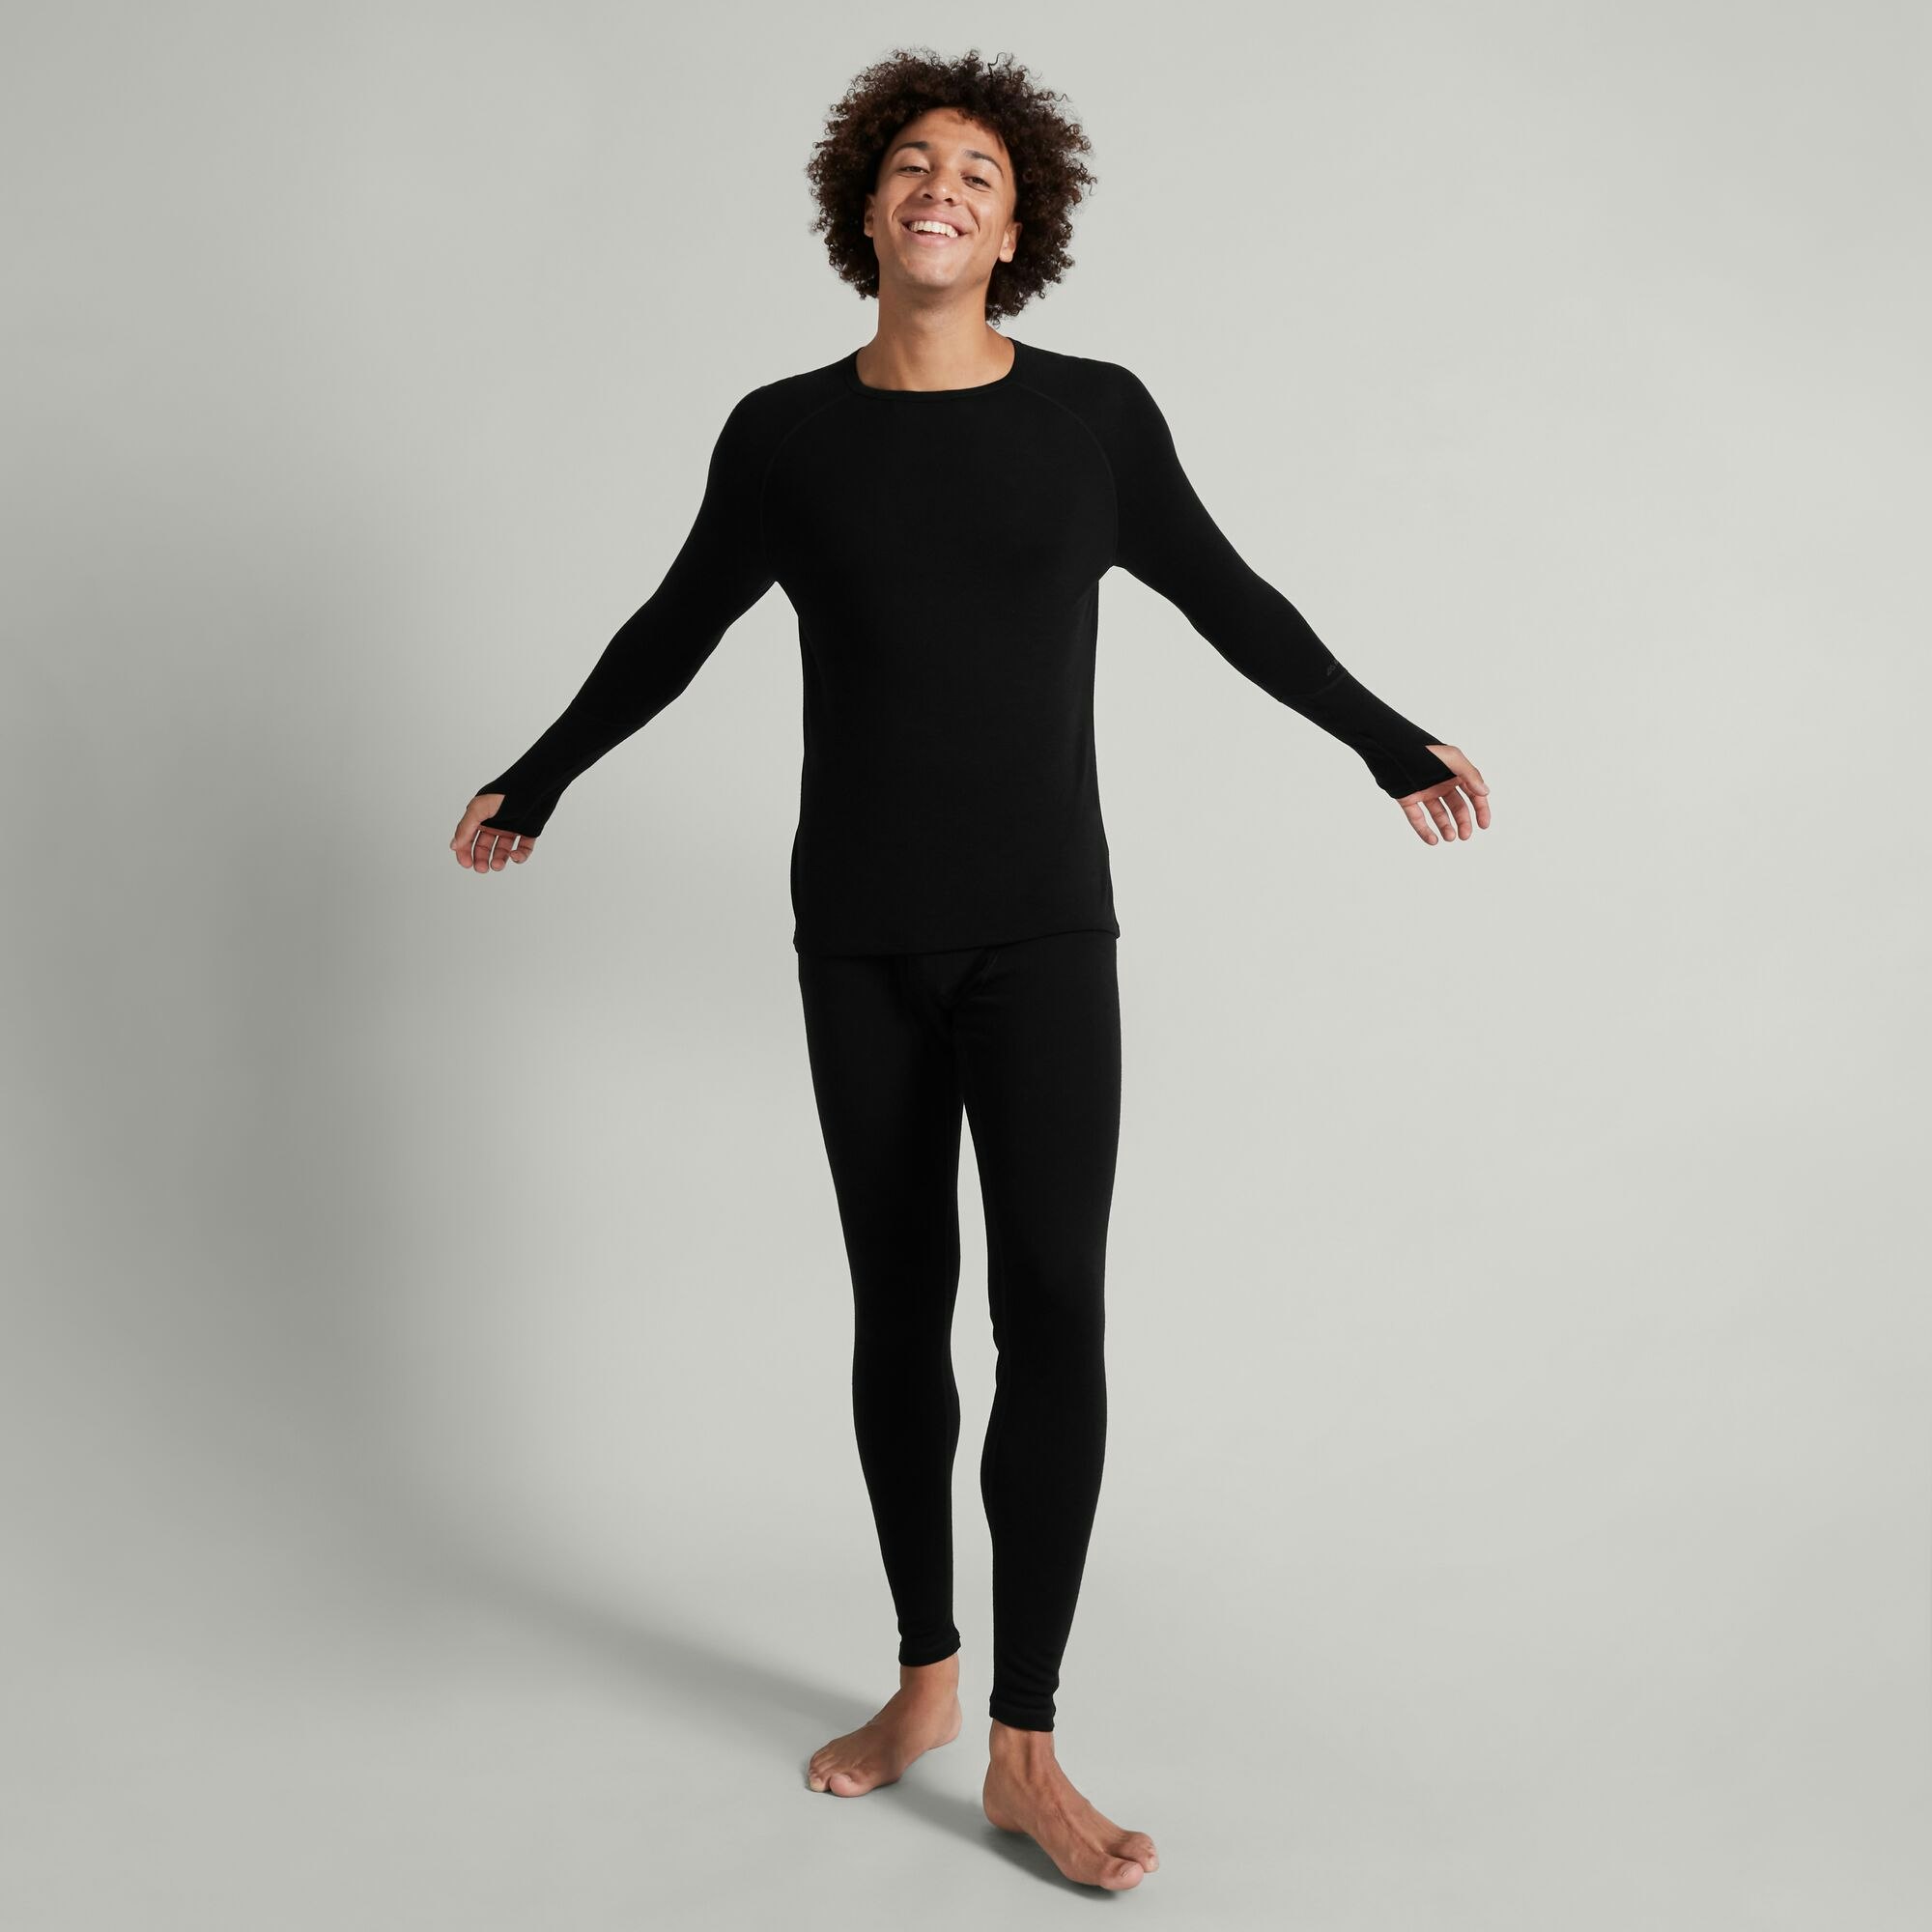 KMDAscent Quick-Drying Odour-Control Men Baselayer Long Sleeve Top by  Kathmandu Online, THE ICONIC